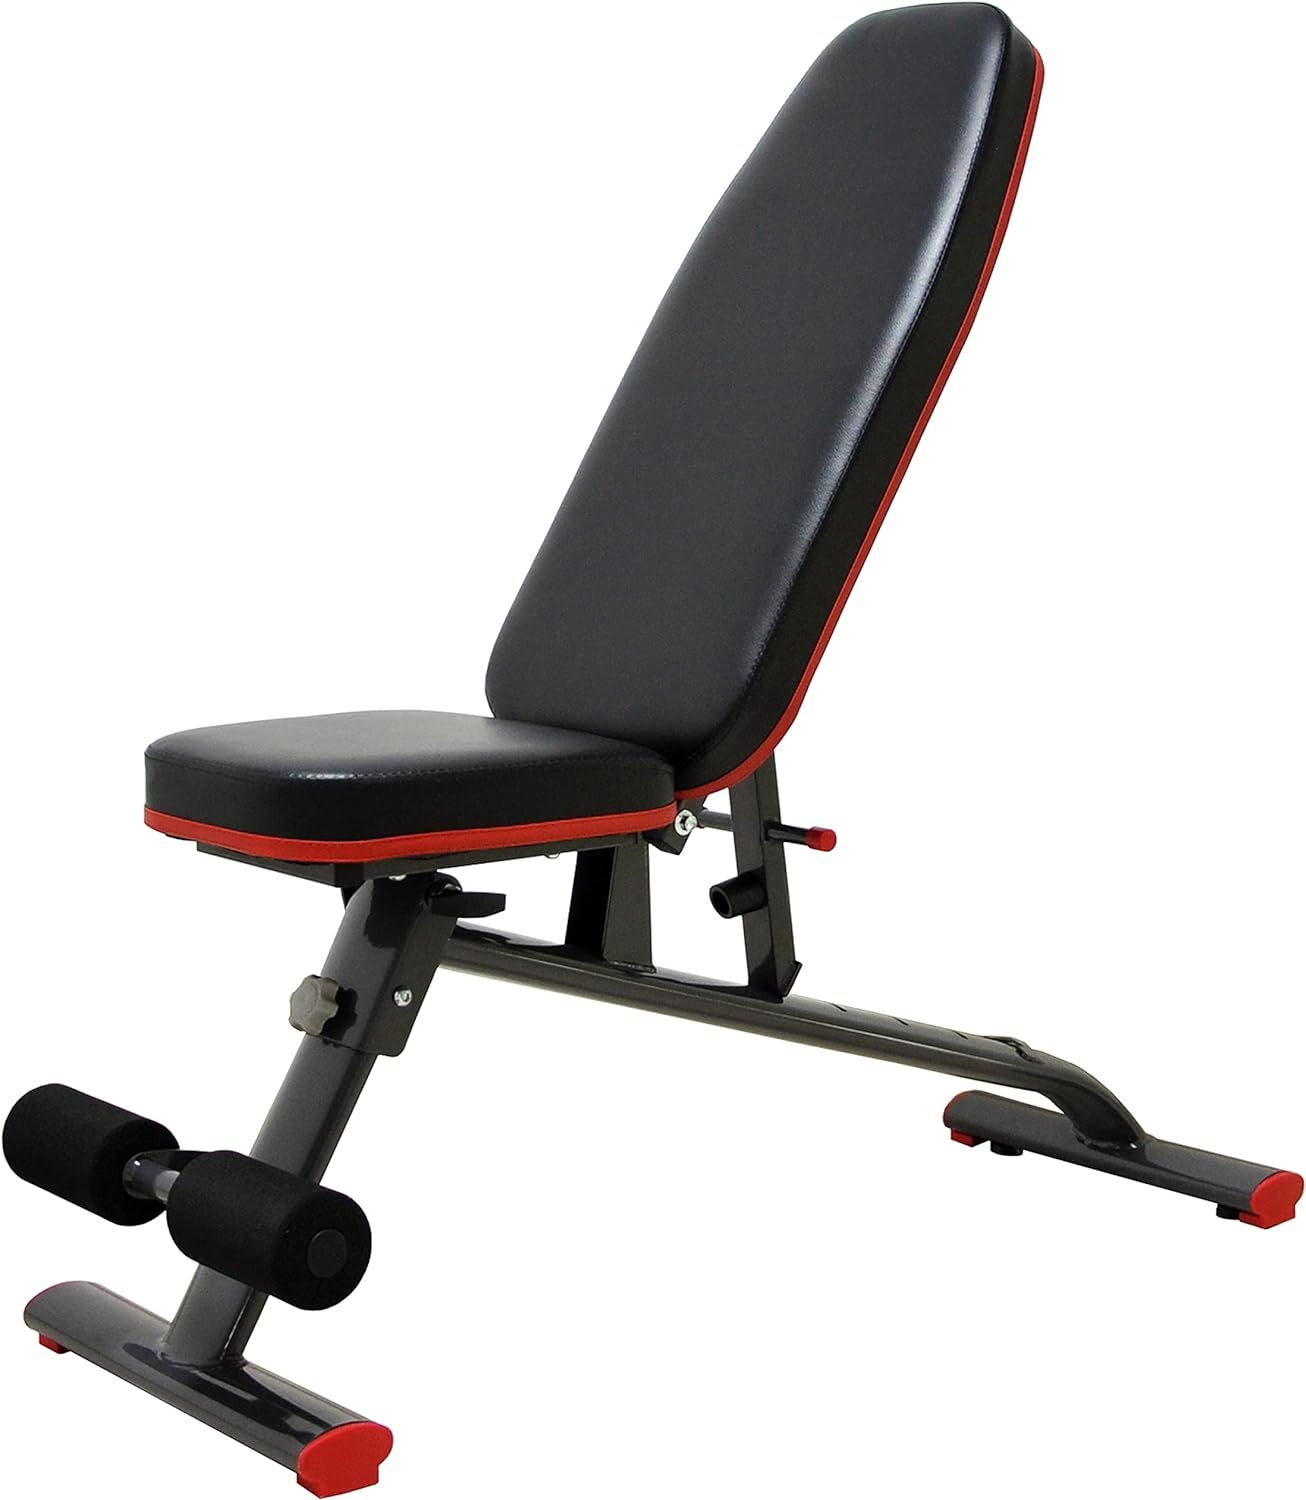 Foldable Flat Incline Exercise Bench